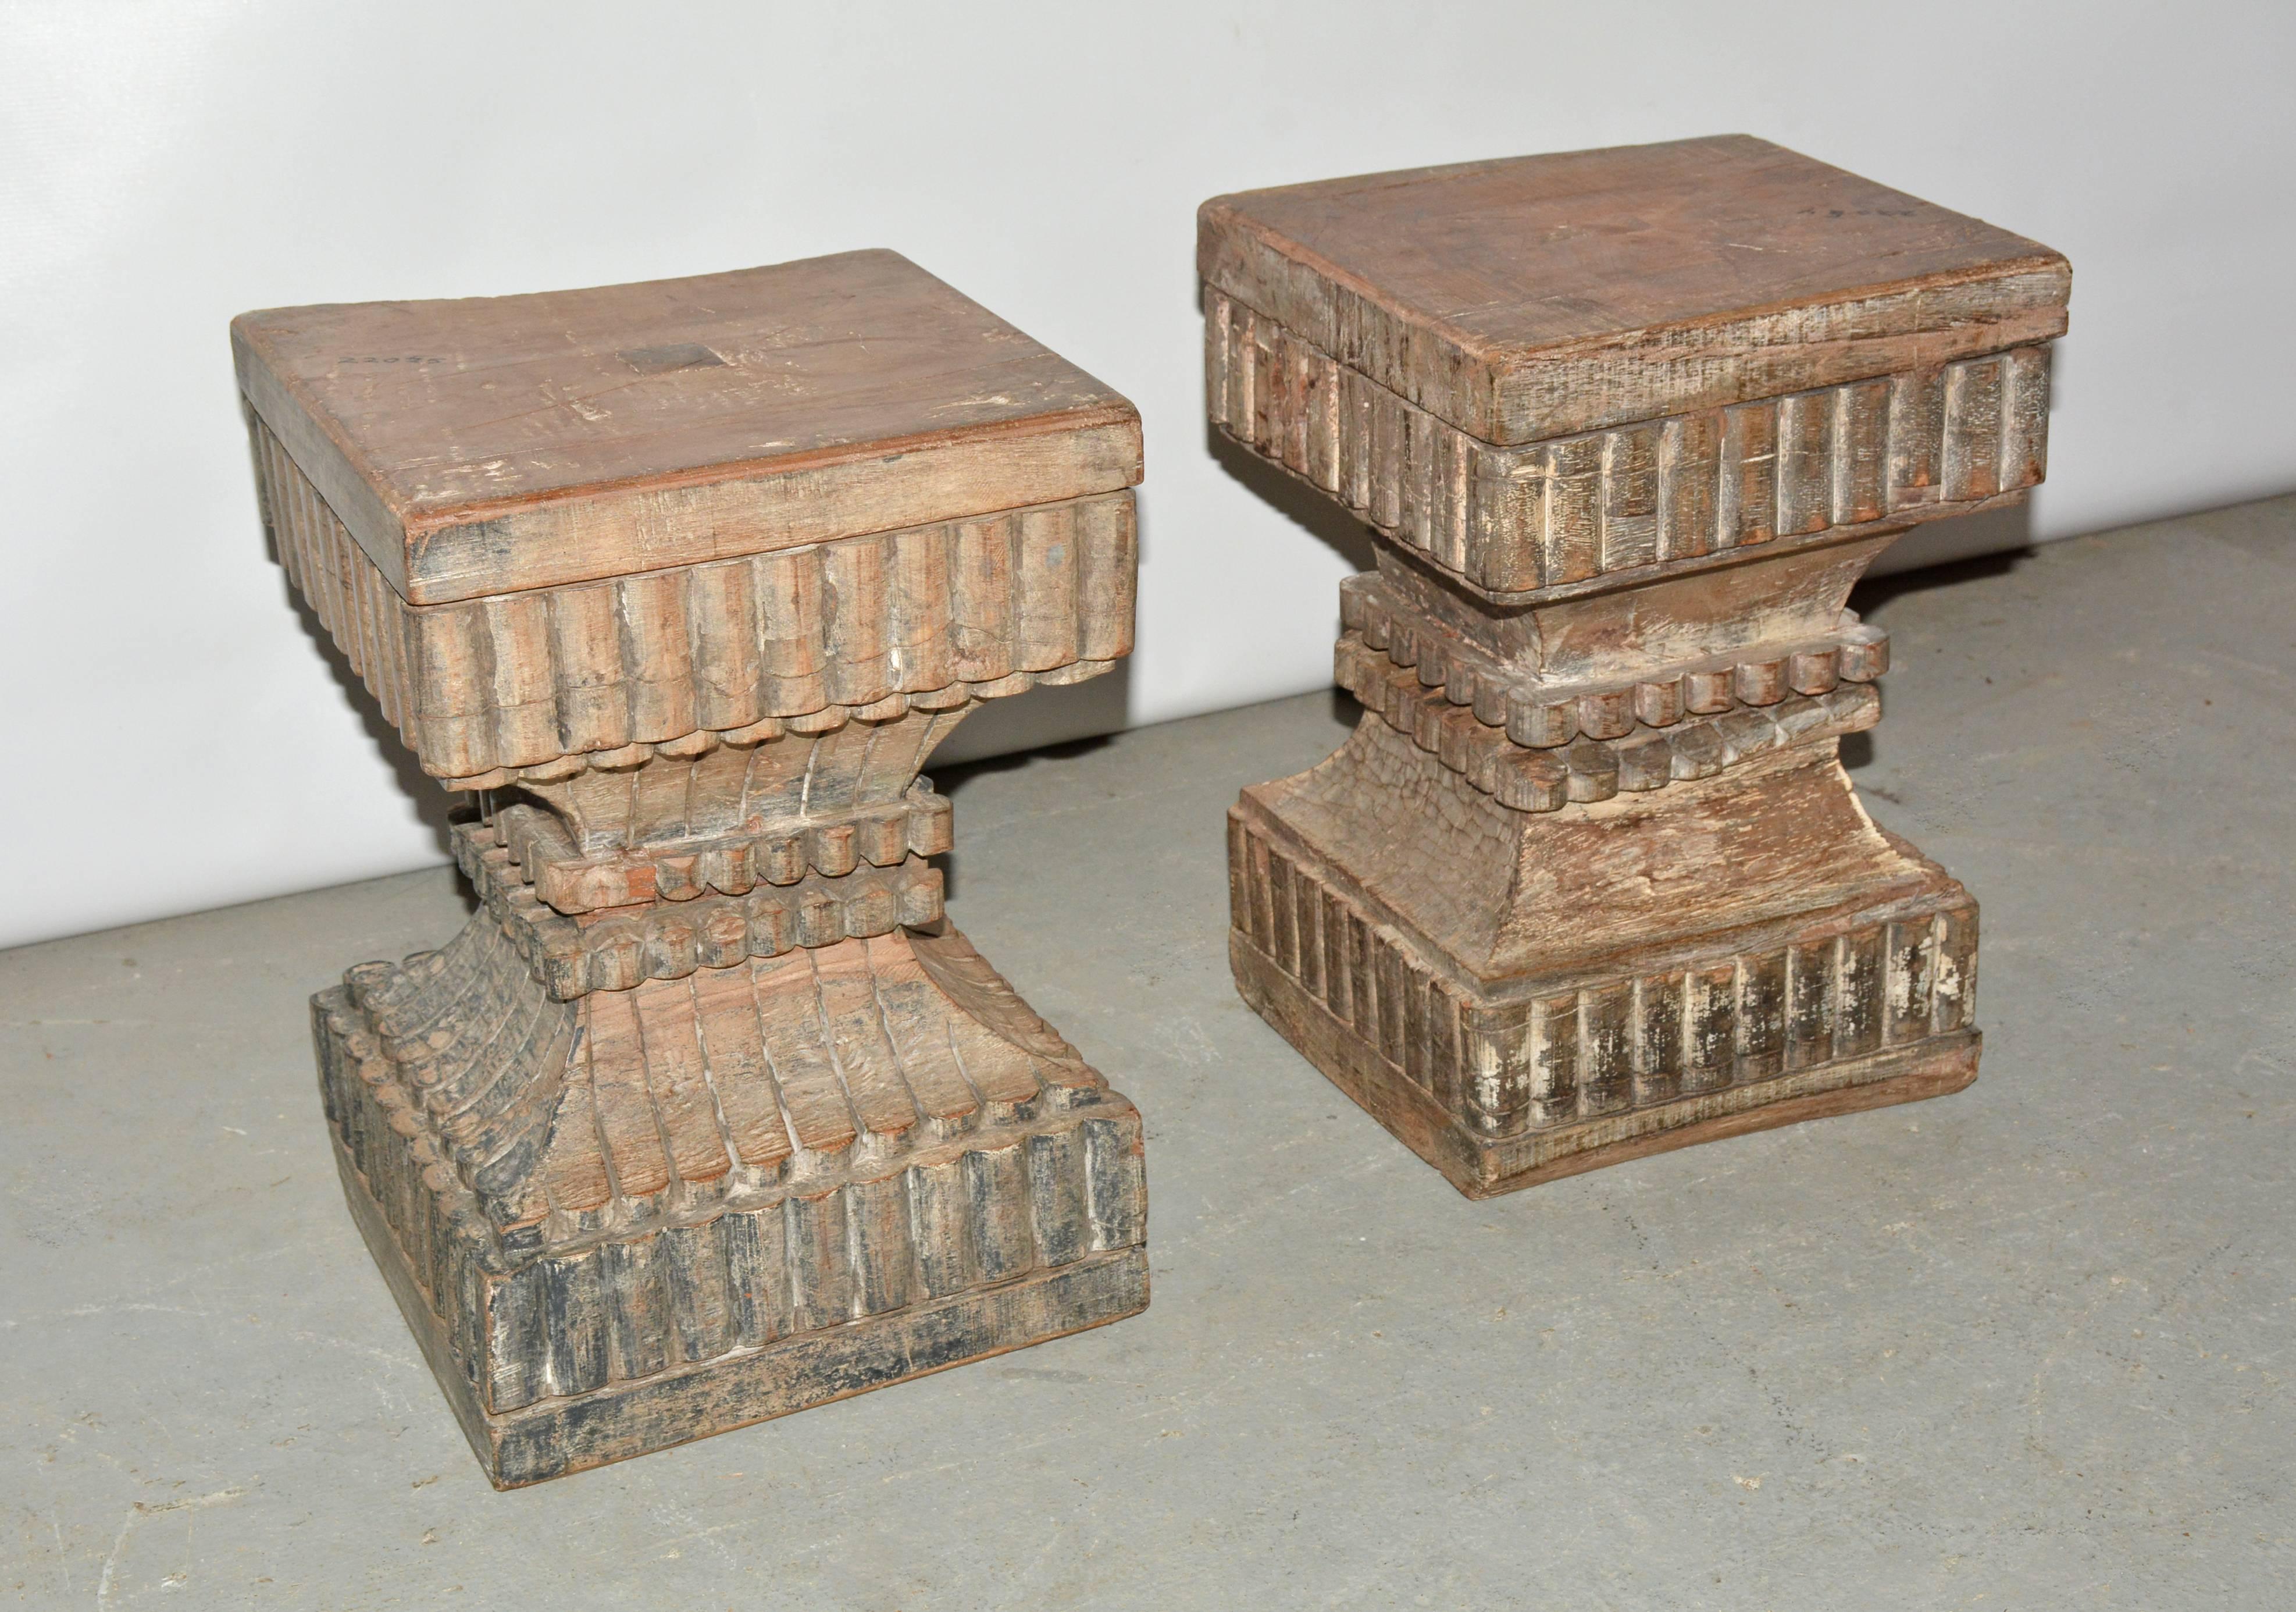 Two very similar Indian carved wood pedestal, plinth, table bases or stools. Beautifully hand carved with wonderful wood patina showing paint remnant giving them wonderful patina and character. Once part of a column, reduced to a size usable as end